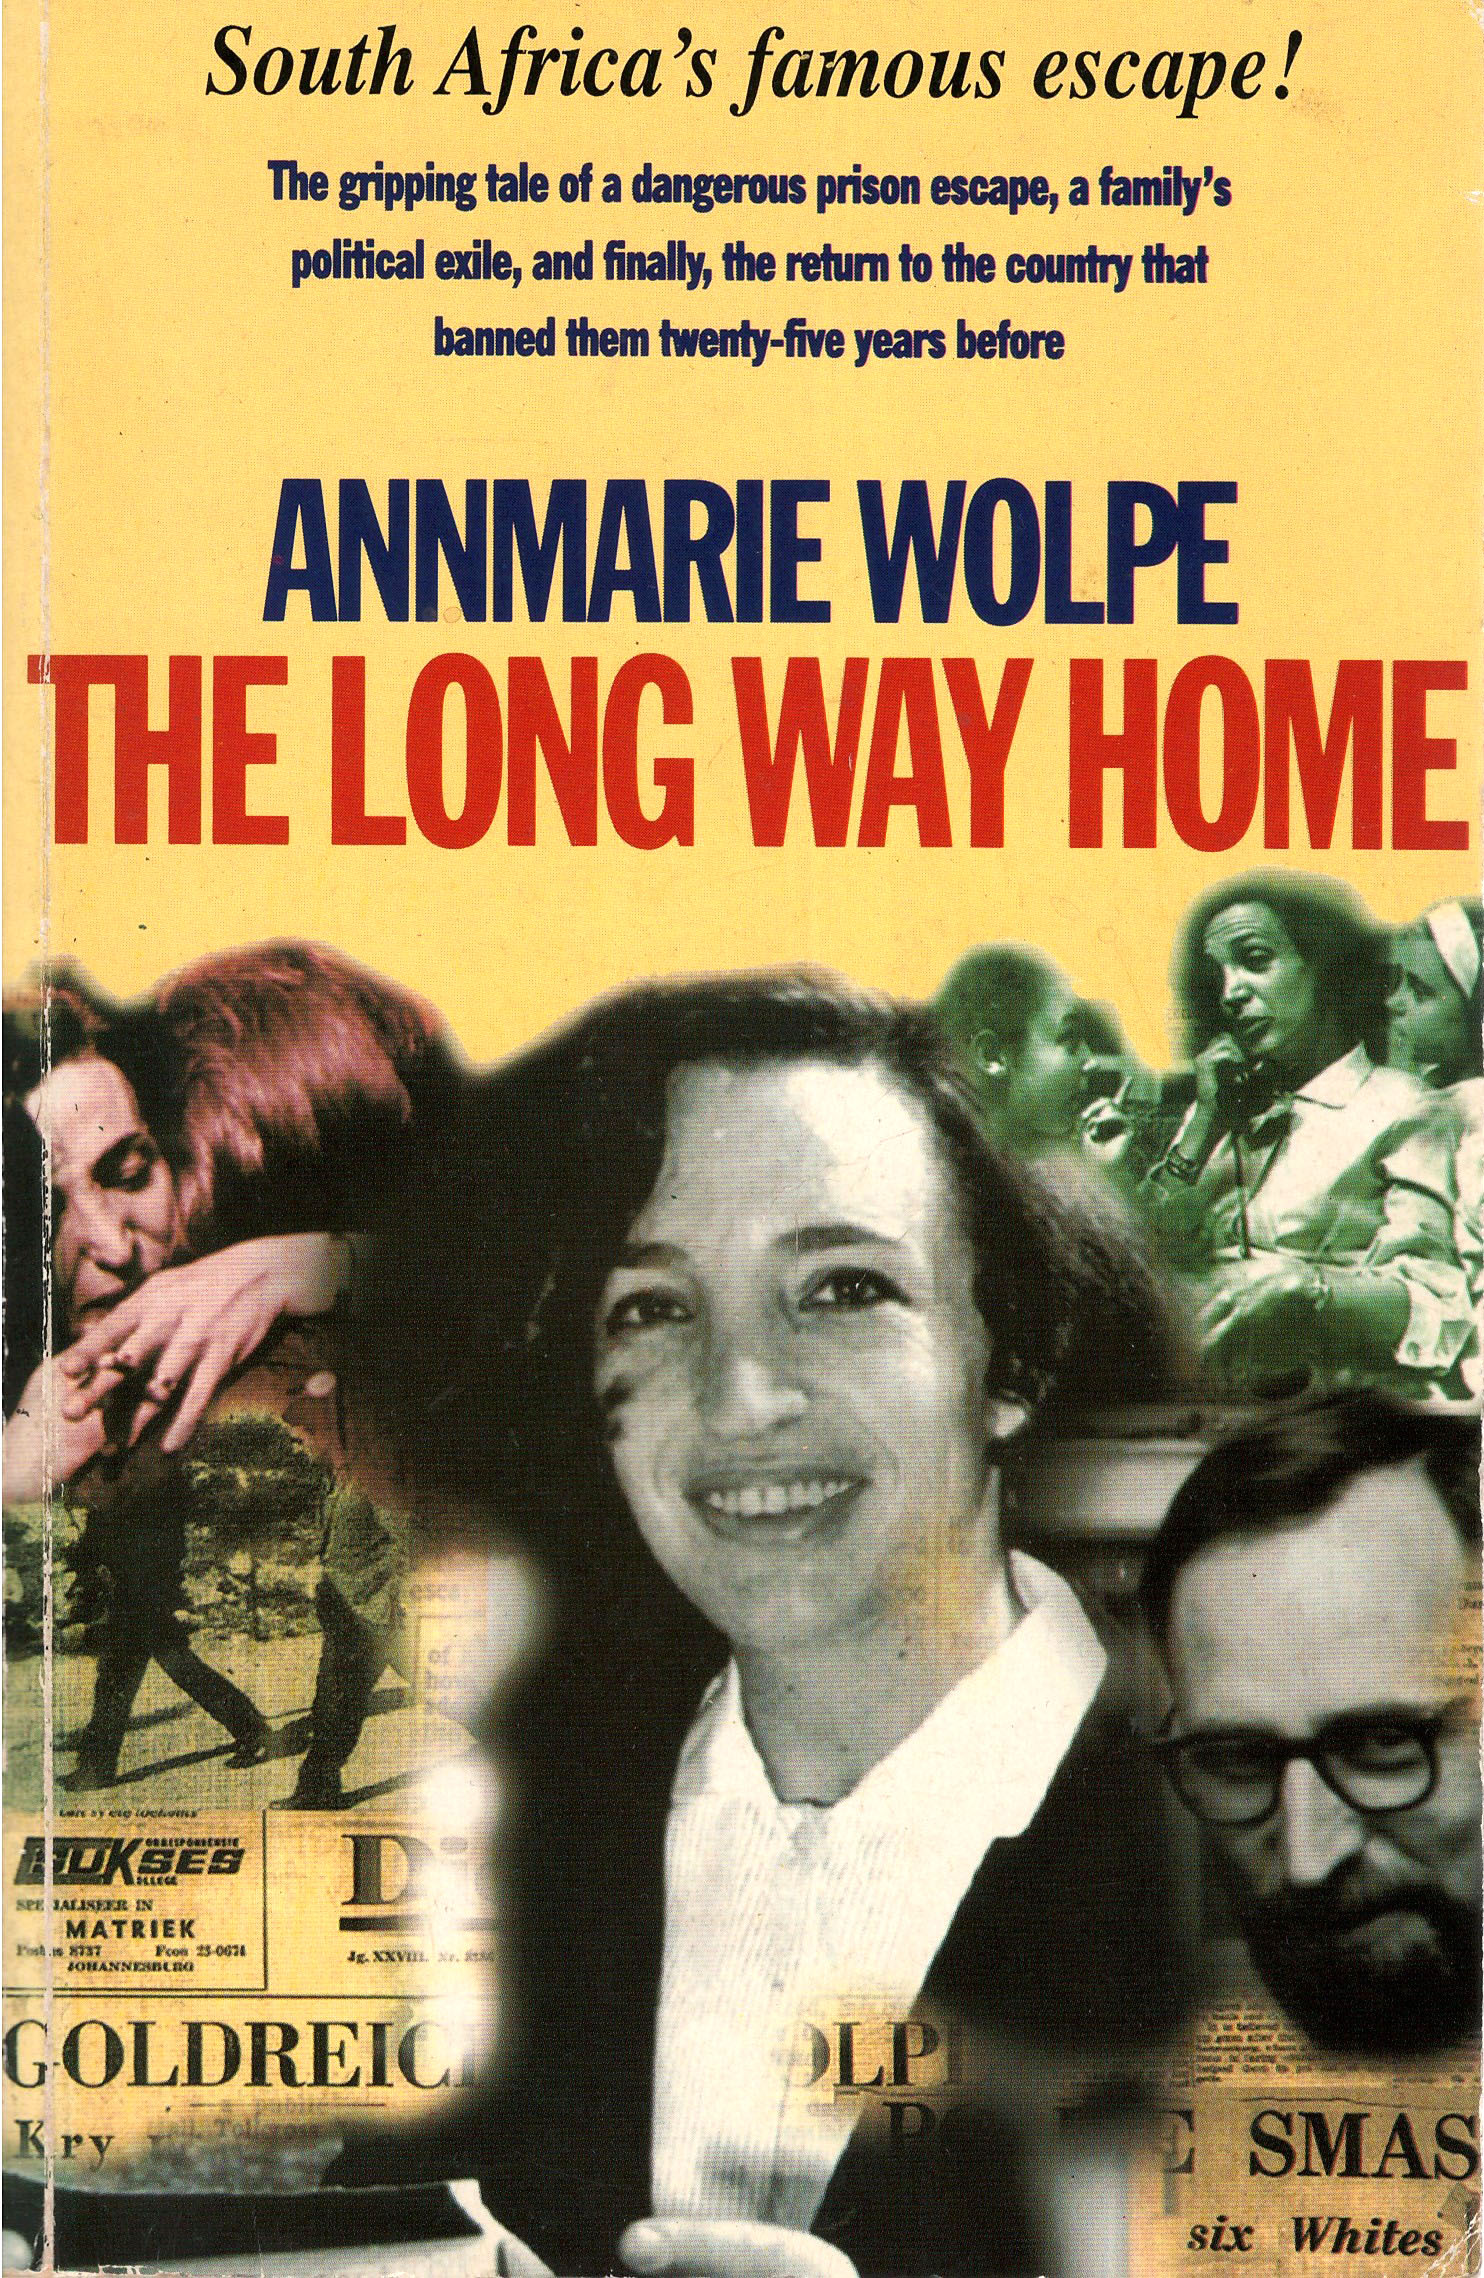 The Long Way Home by AnnMarie Wolpe